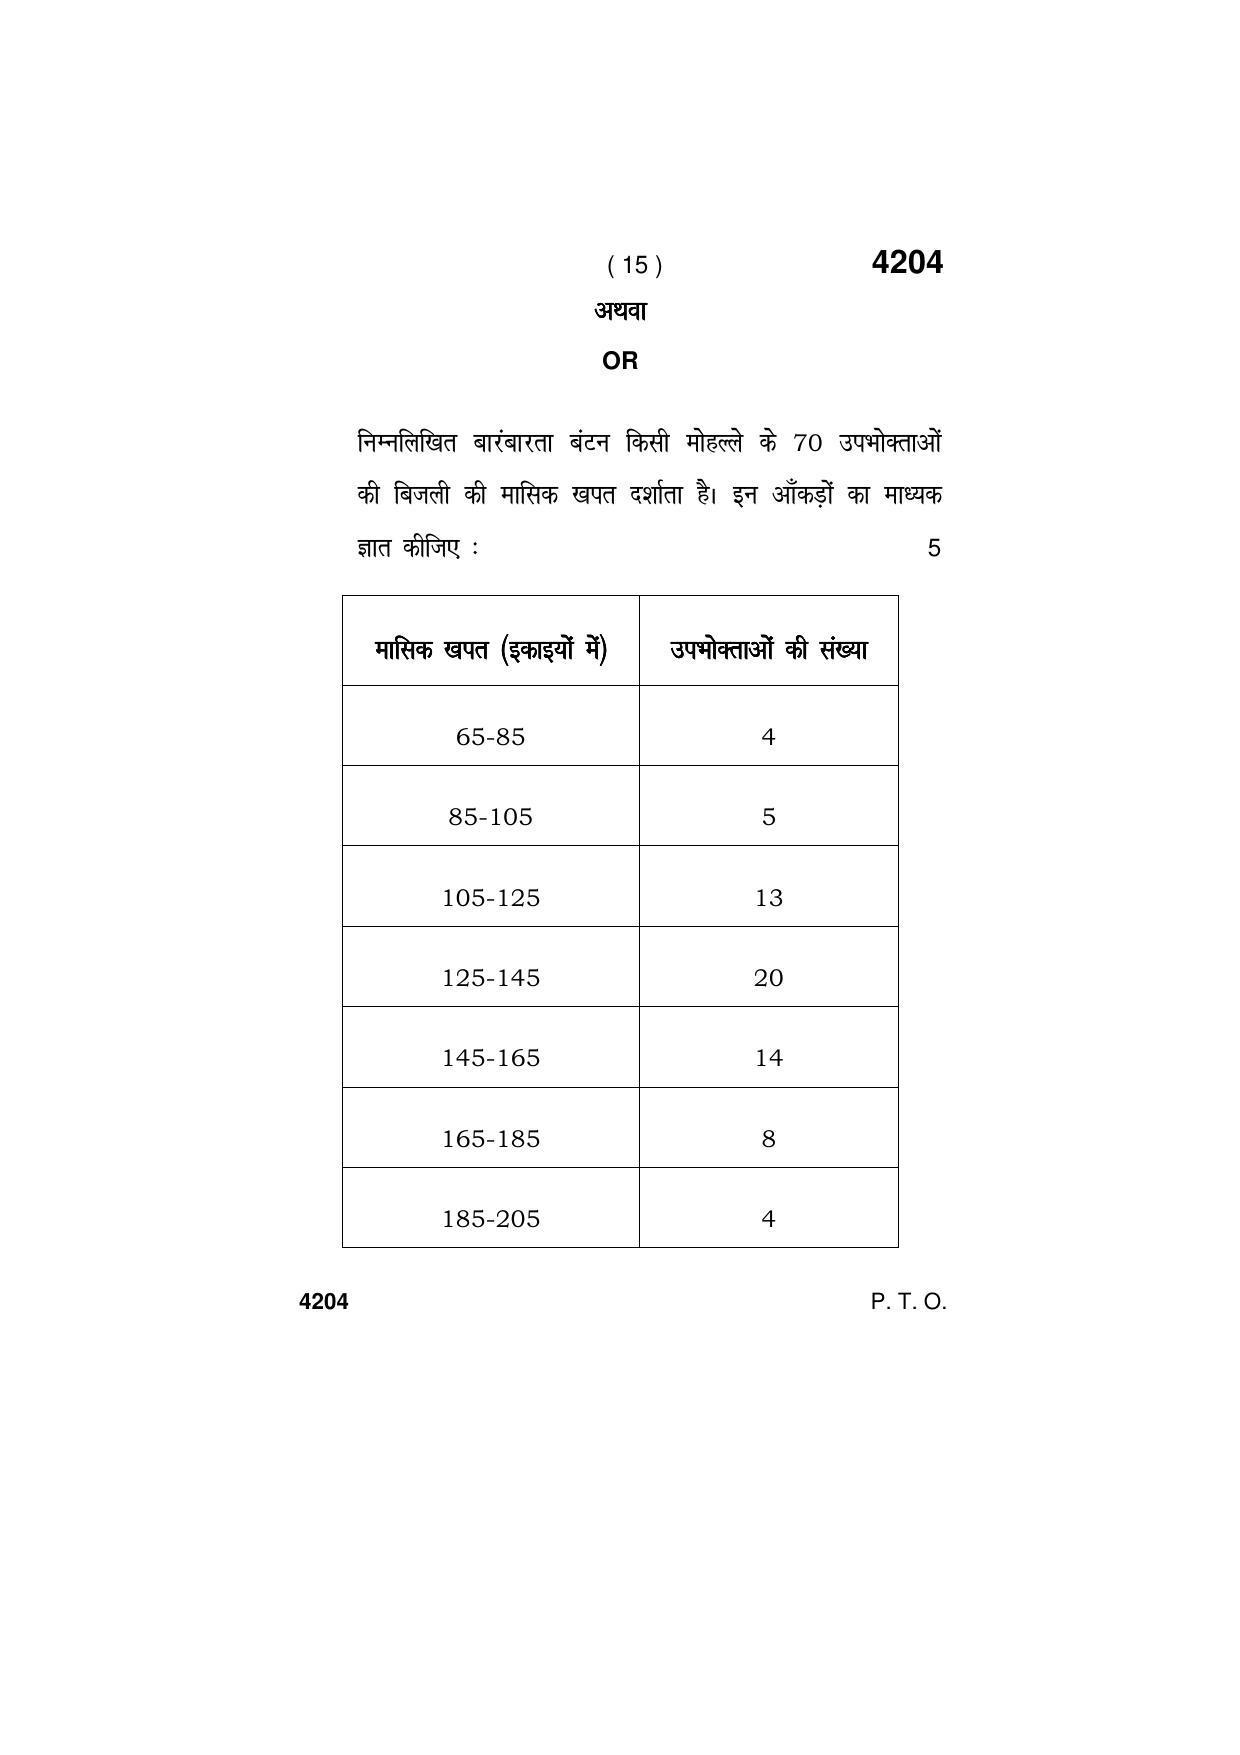 Haryana Board HBSE Class 10 Mathematics (Blind c) 2019 Question Paper - Page 15